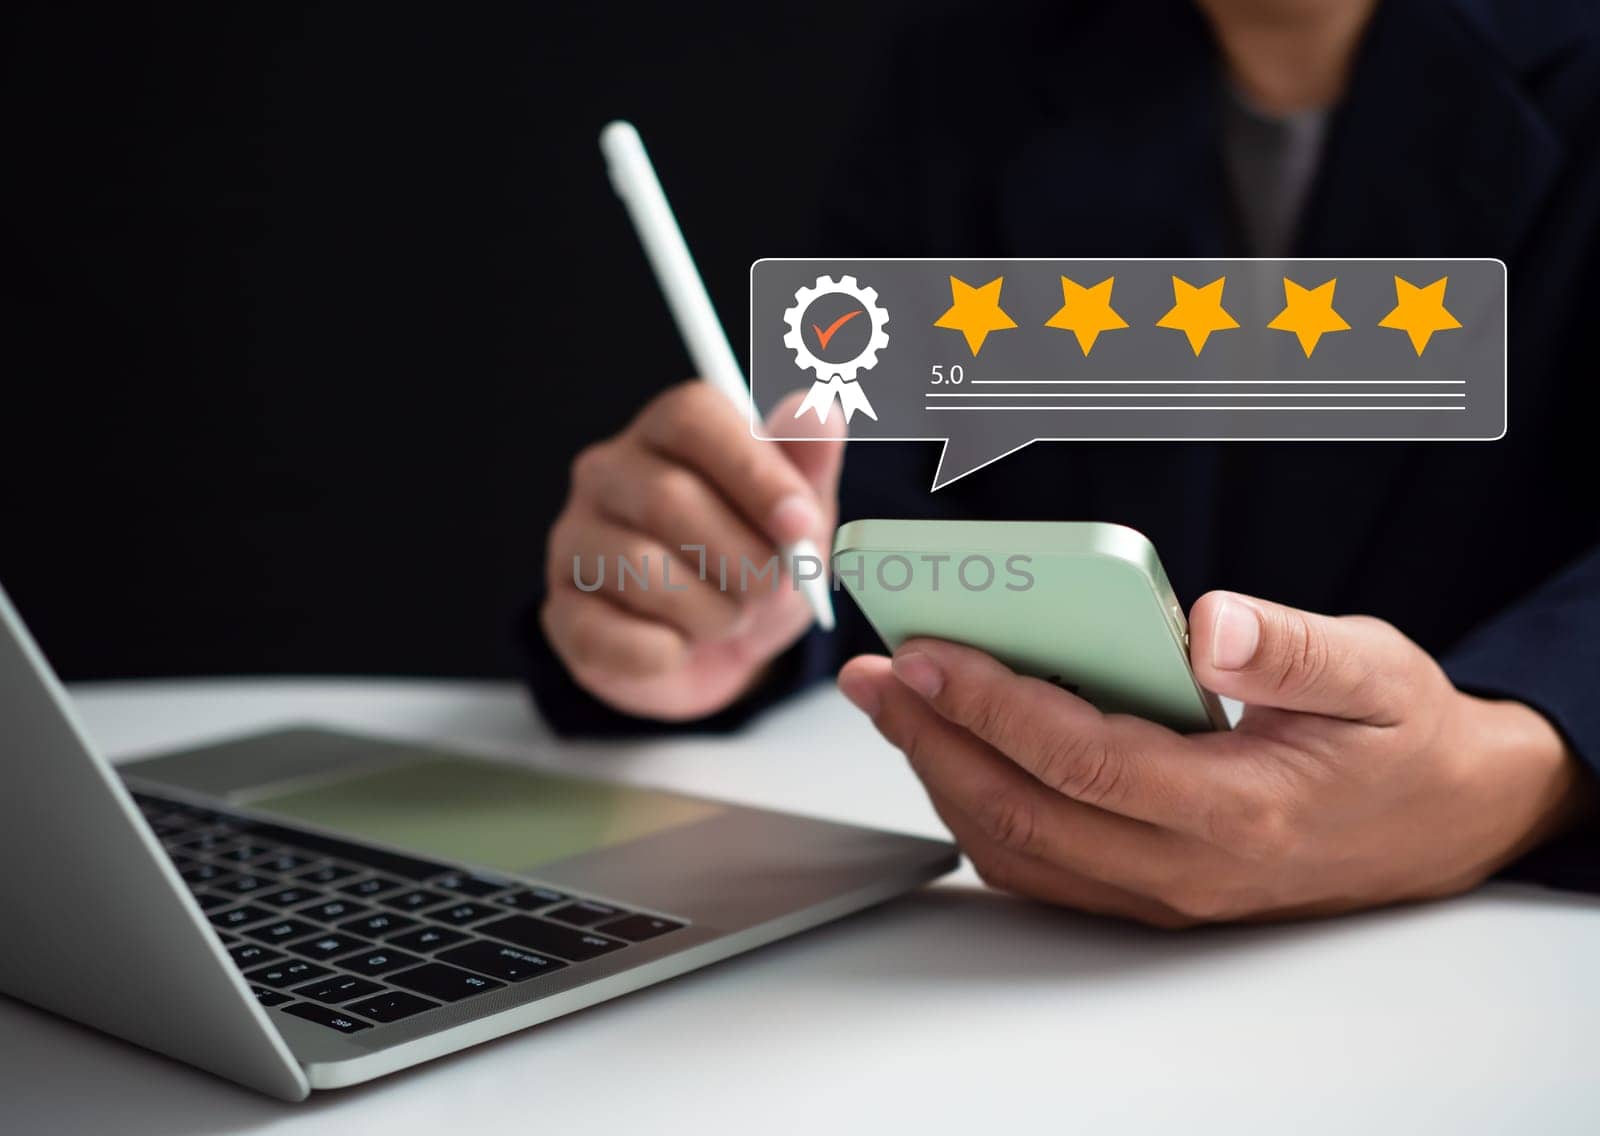 Business people use computers and telephones to analyze customer service satisfaction. Customer Satisfaction Survey concept, service experience rating online application, satisfaction feedback review by Unimages2527